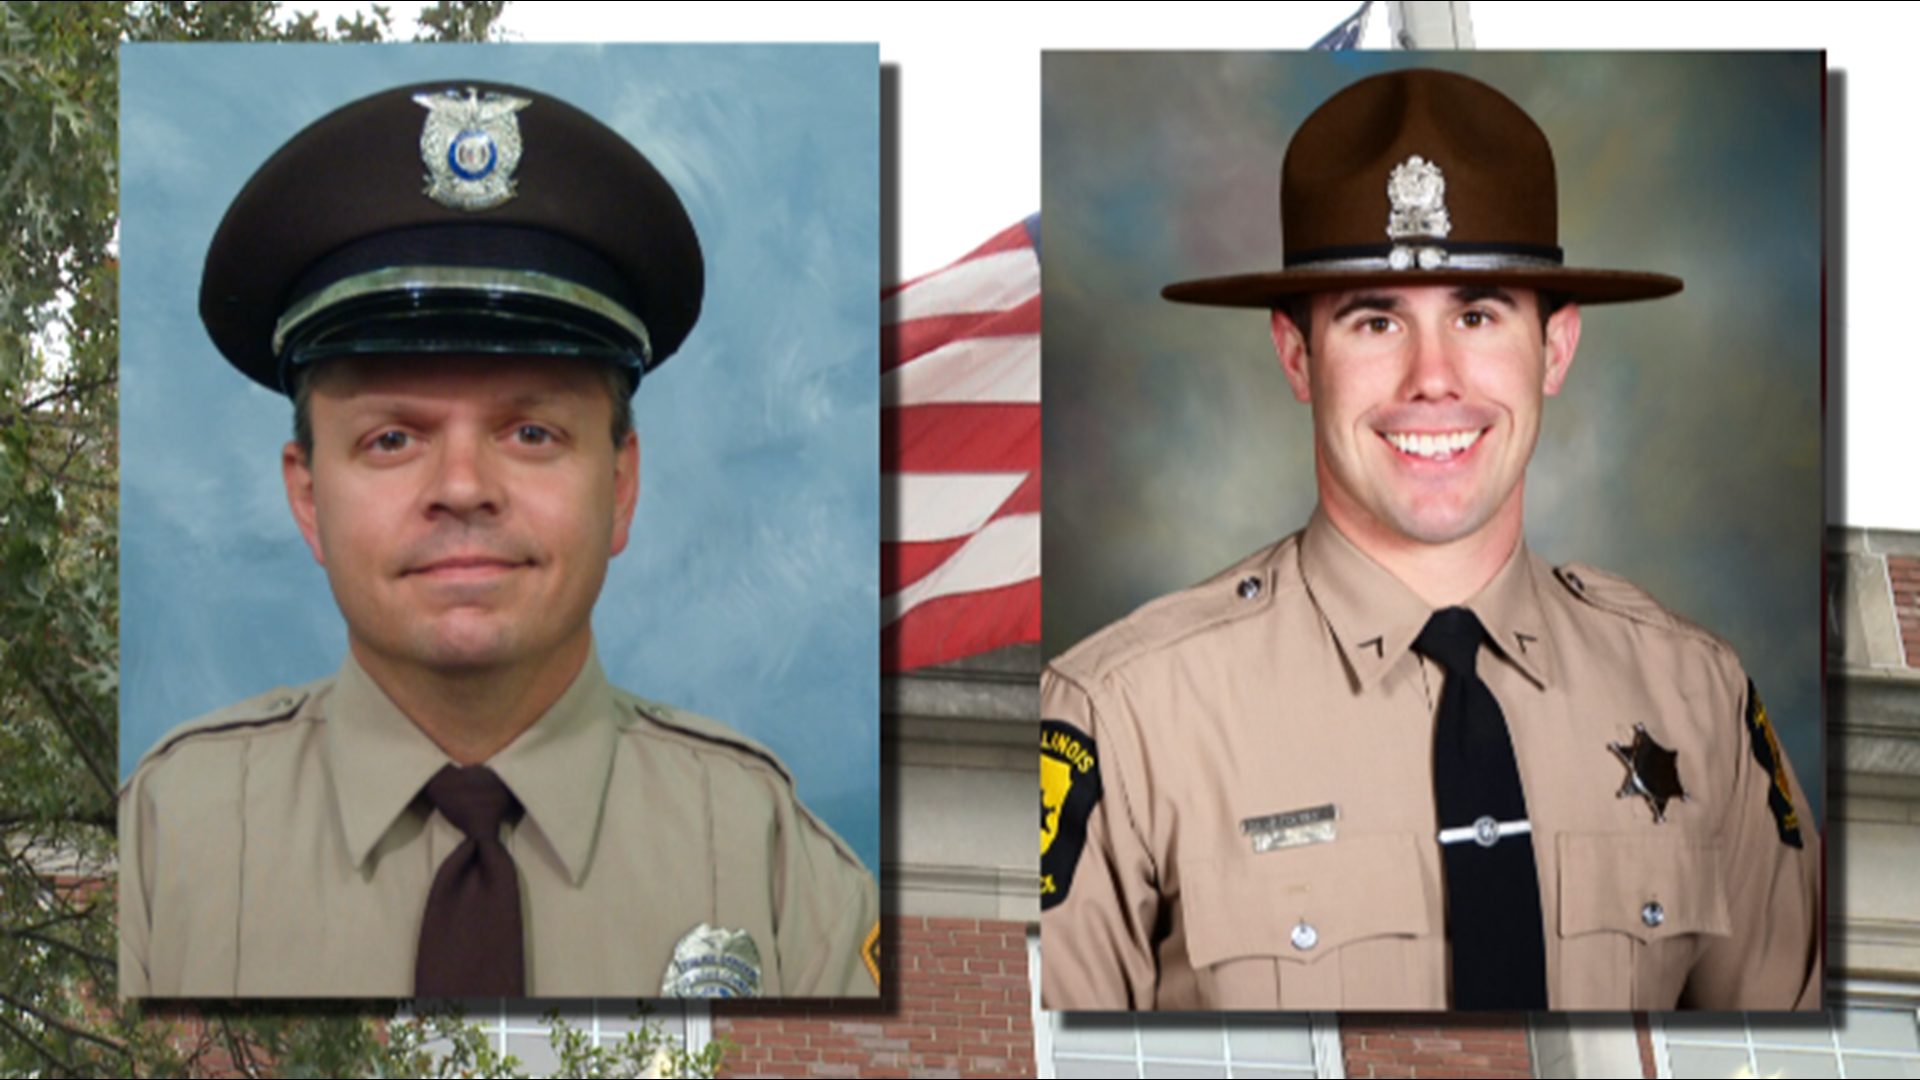 Officer James Mitch Ellis will be missed by his community, much like Trooper Nickolas Hopkins.